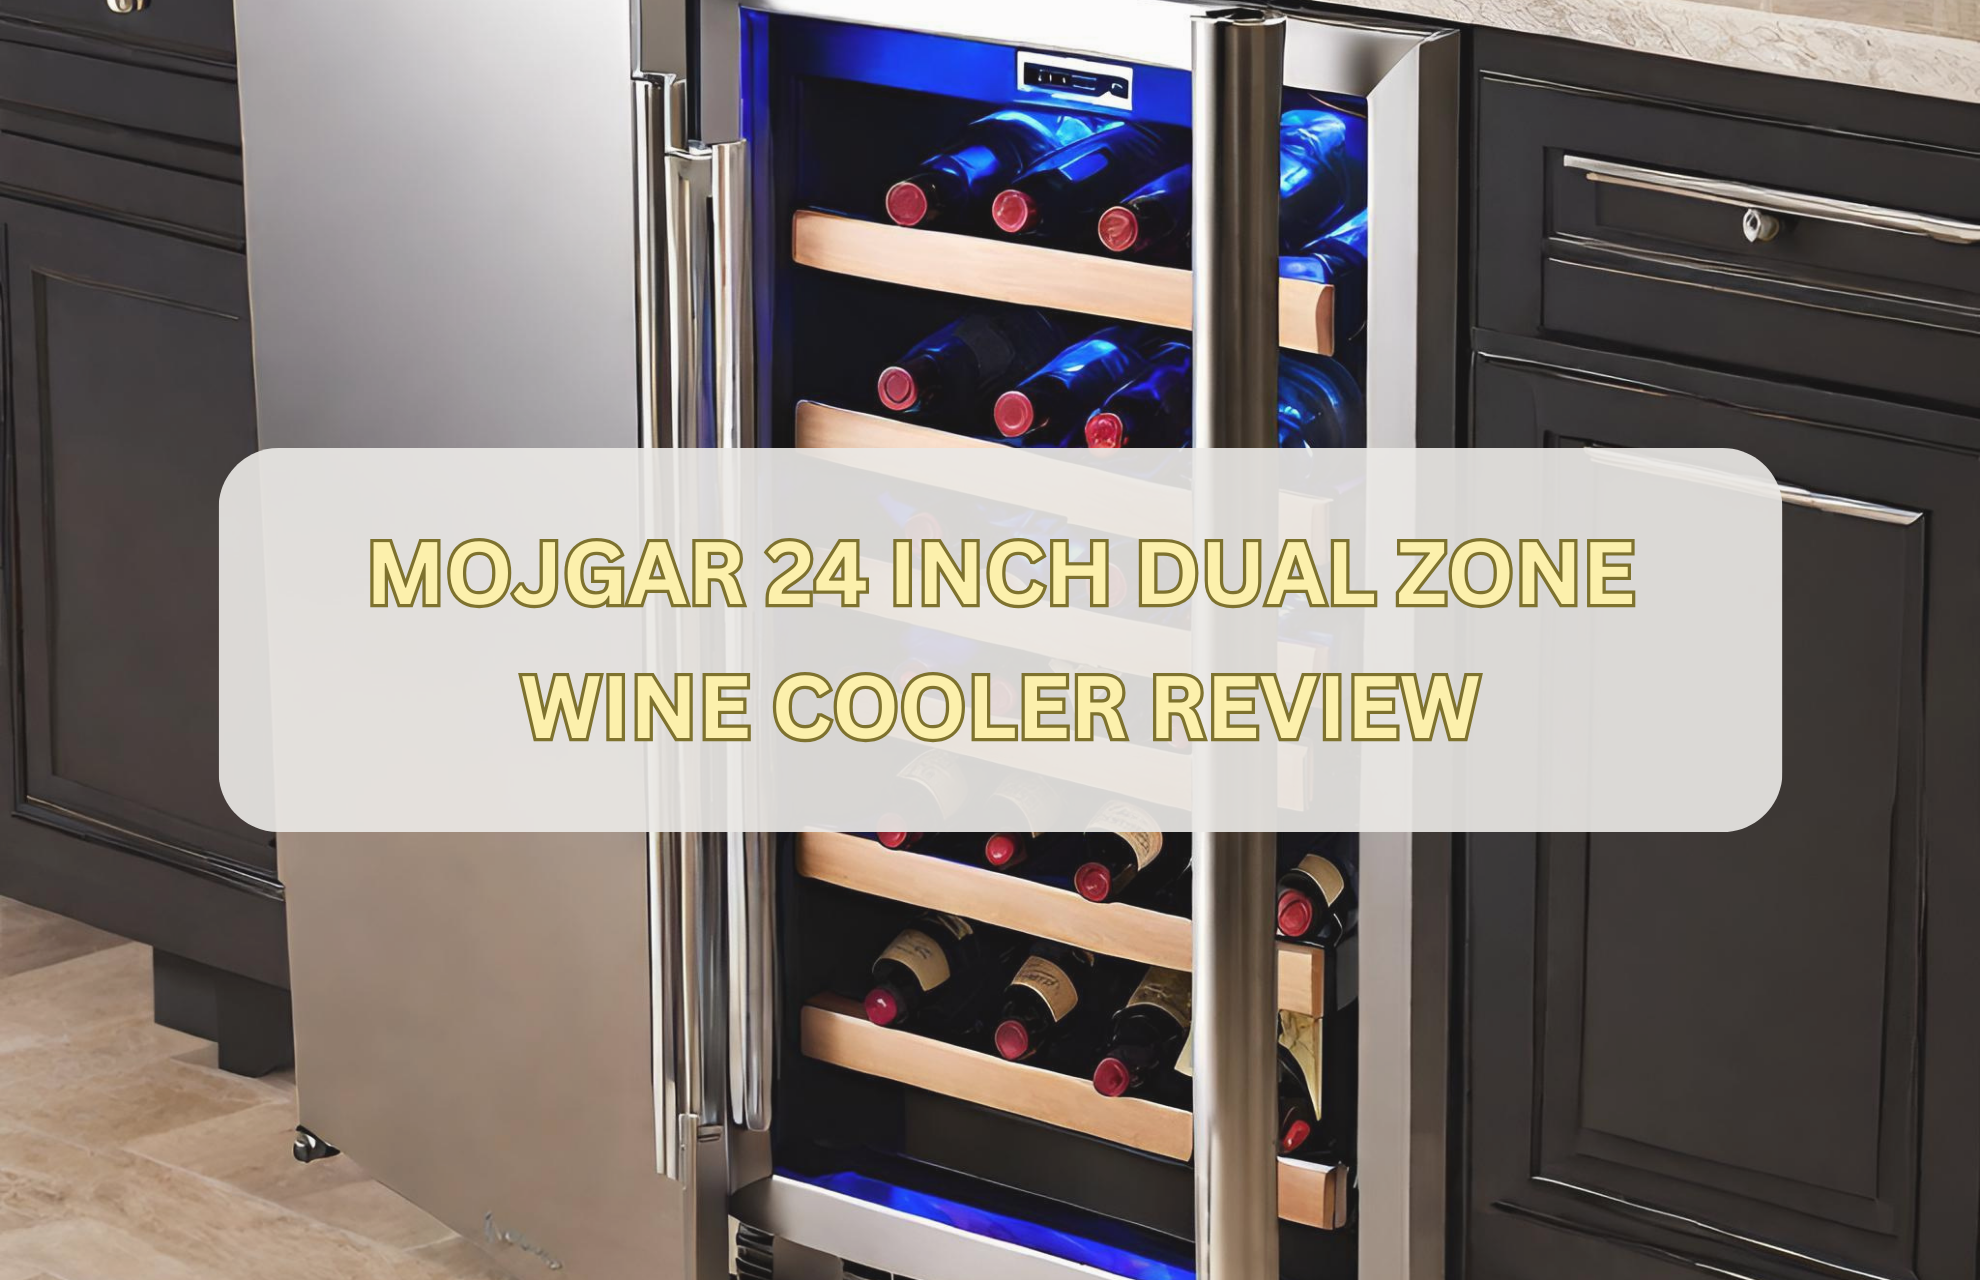 MOJGAR 24 INCH DUAL ZONE WINE COOLER REVIEW